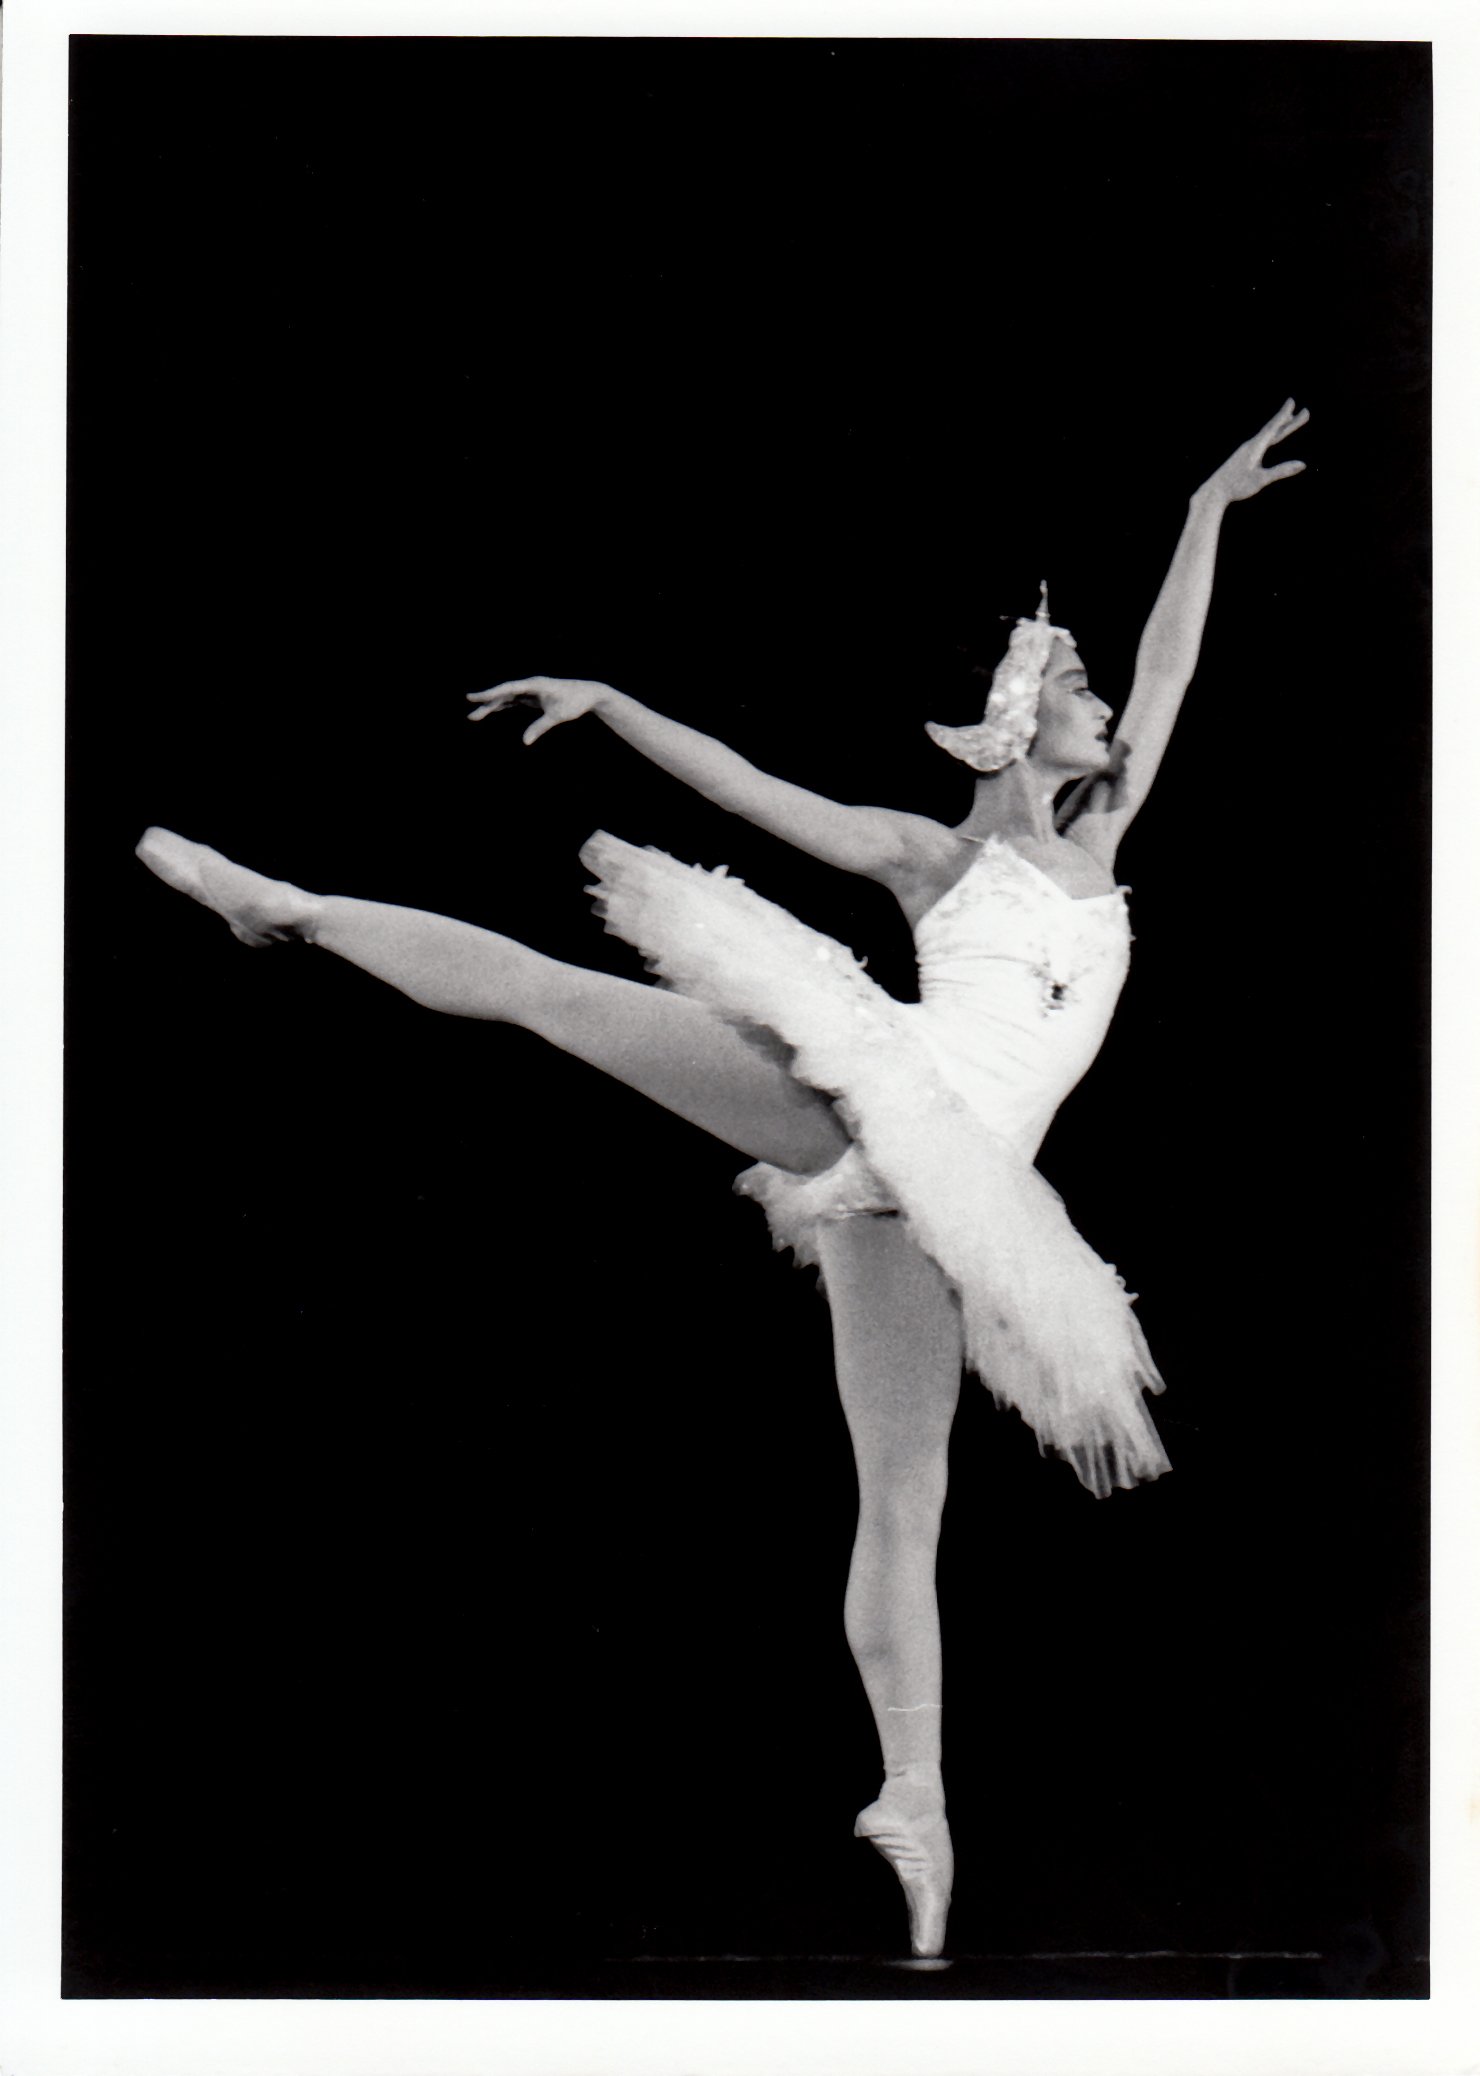    As Odette in Philippine Ballet Theater’s production of Swan Lake, 1994: “ Swan Lake  is an unforgettable love story, perhaps the most romantic ballet of its period. It is the story of Odette, the White Swan Princess, who is enchanted by the virule